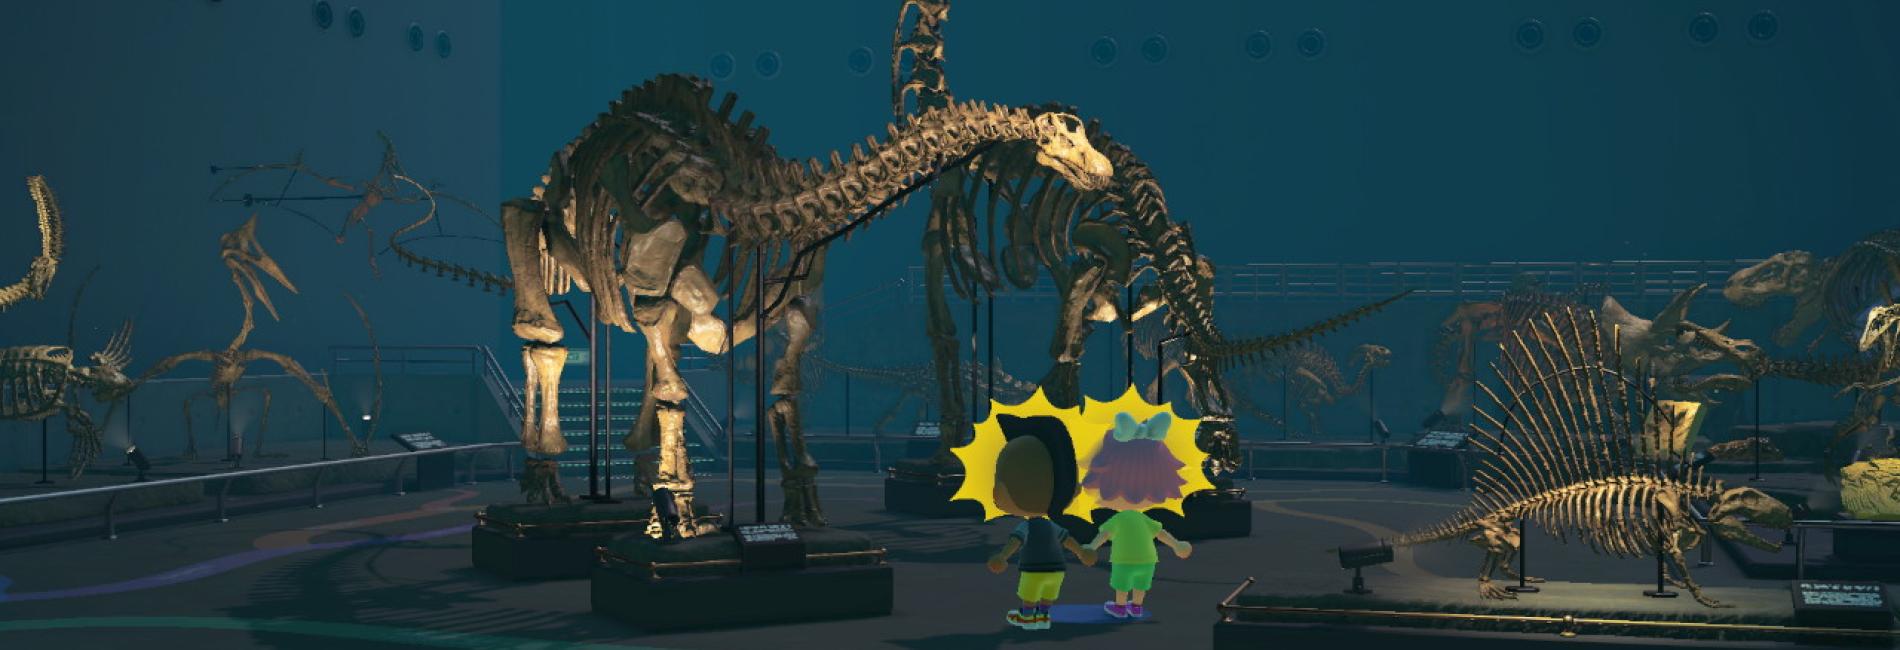 Exploring the dinosaurs in Animal Crossing game